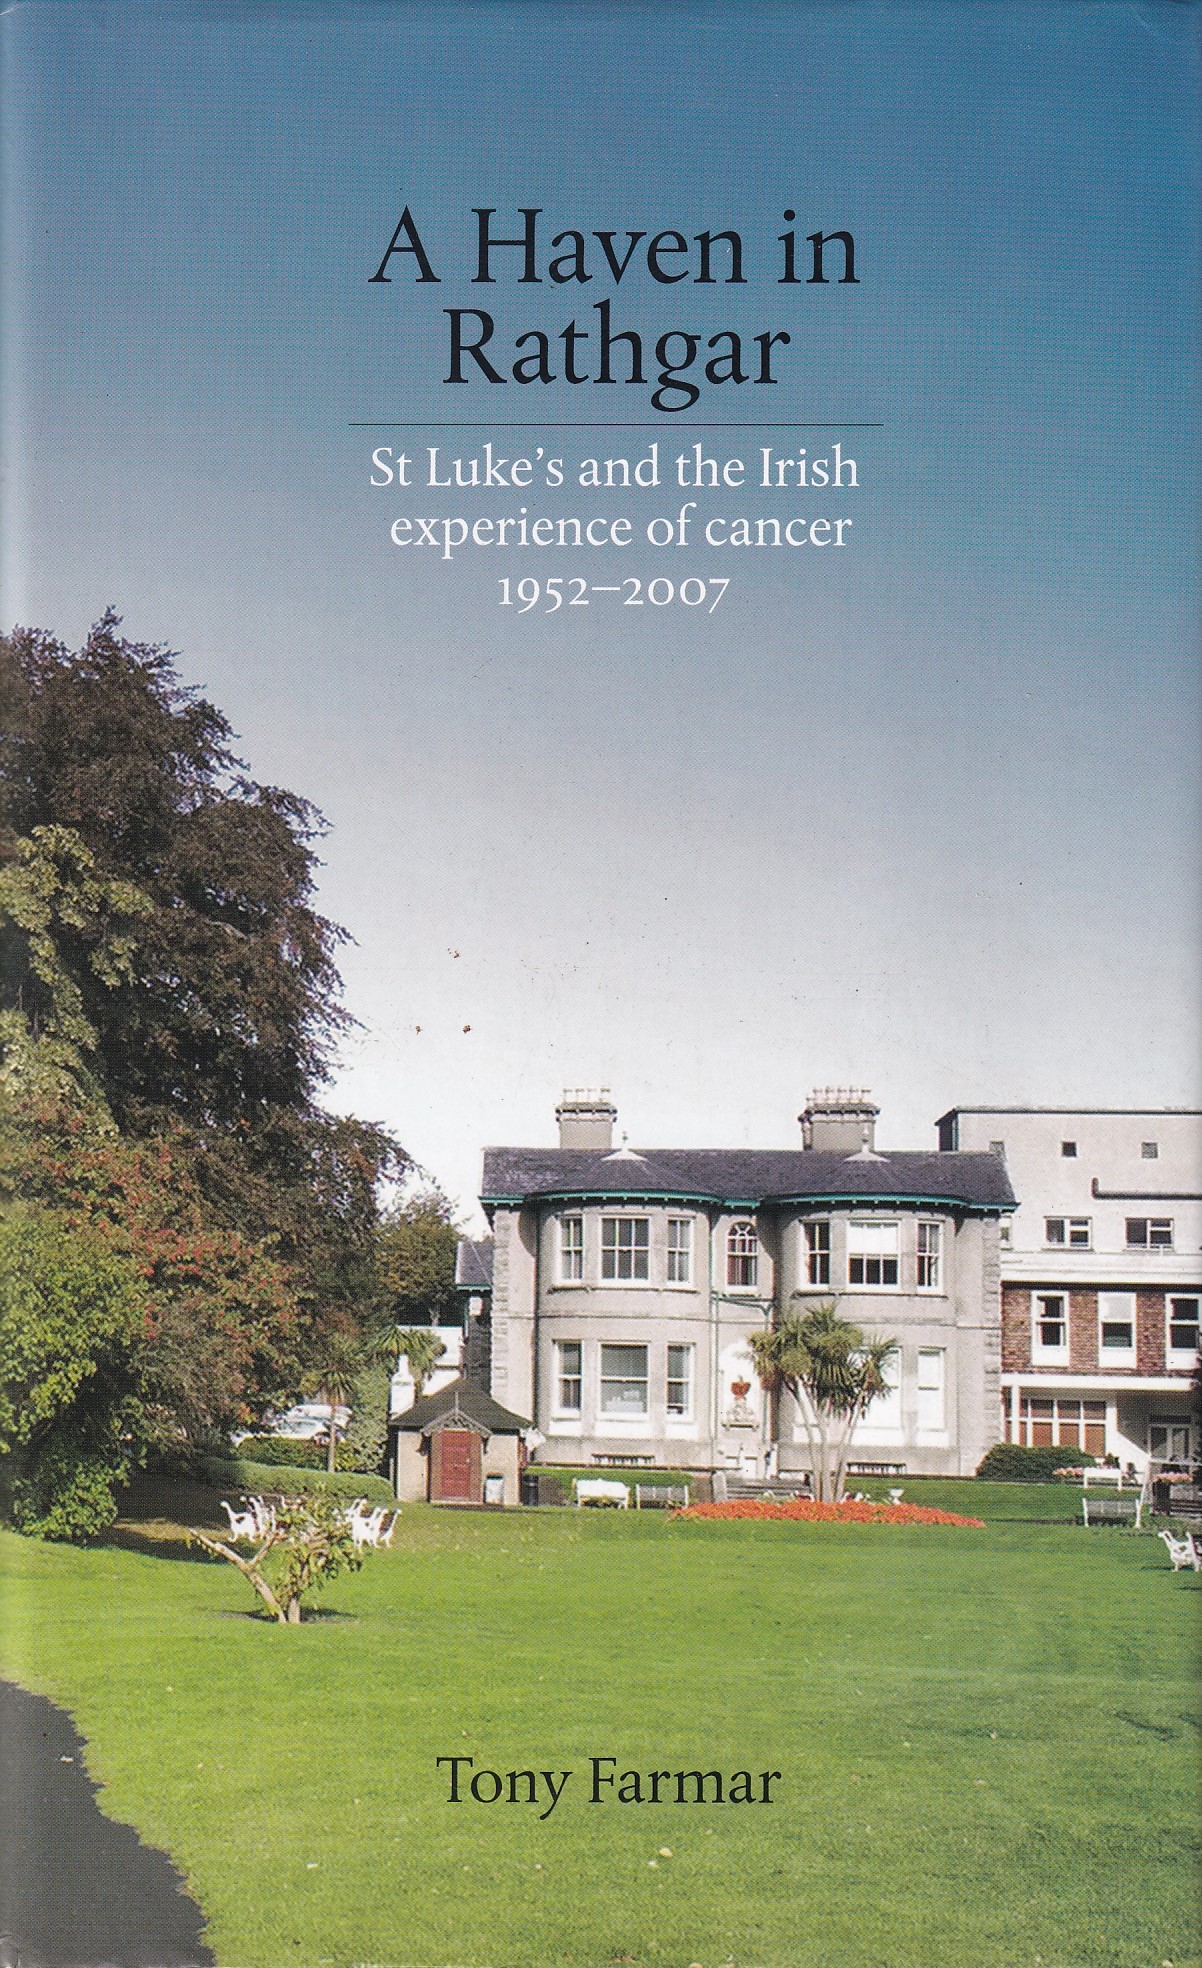 A Haven in Rathgar: St. Luke’s and the Irish experience of cancer, 1952-2007 | Tony Farmar | Charlie Byrne's